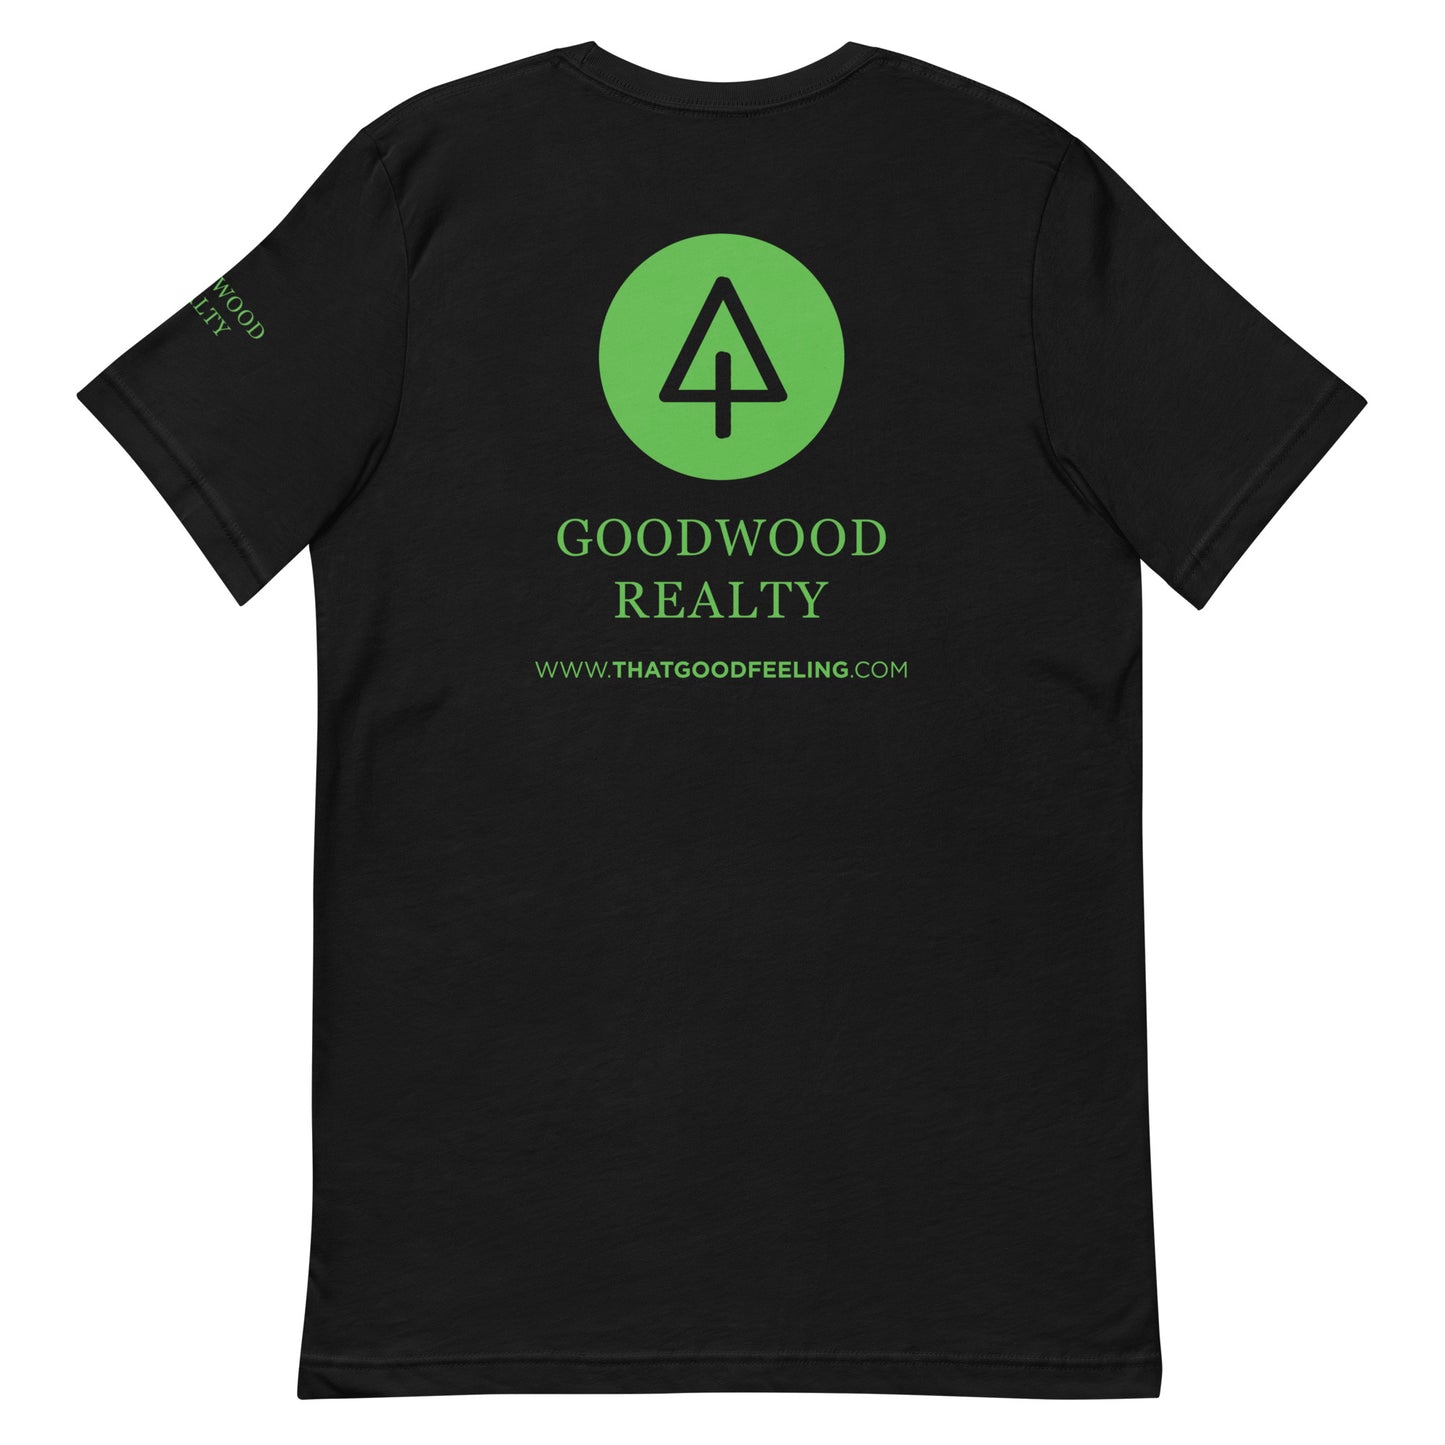 Goodwood Realty 2020 Throwback Unisex t-shirt